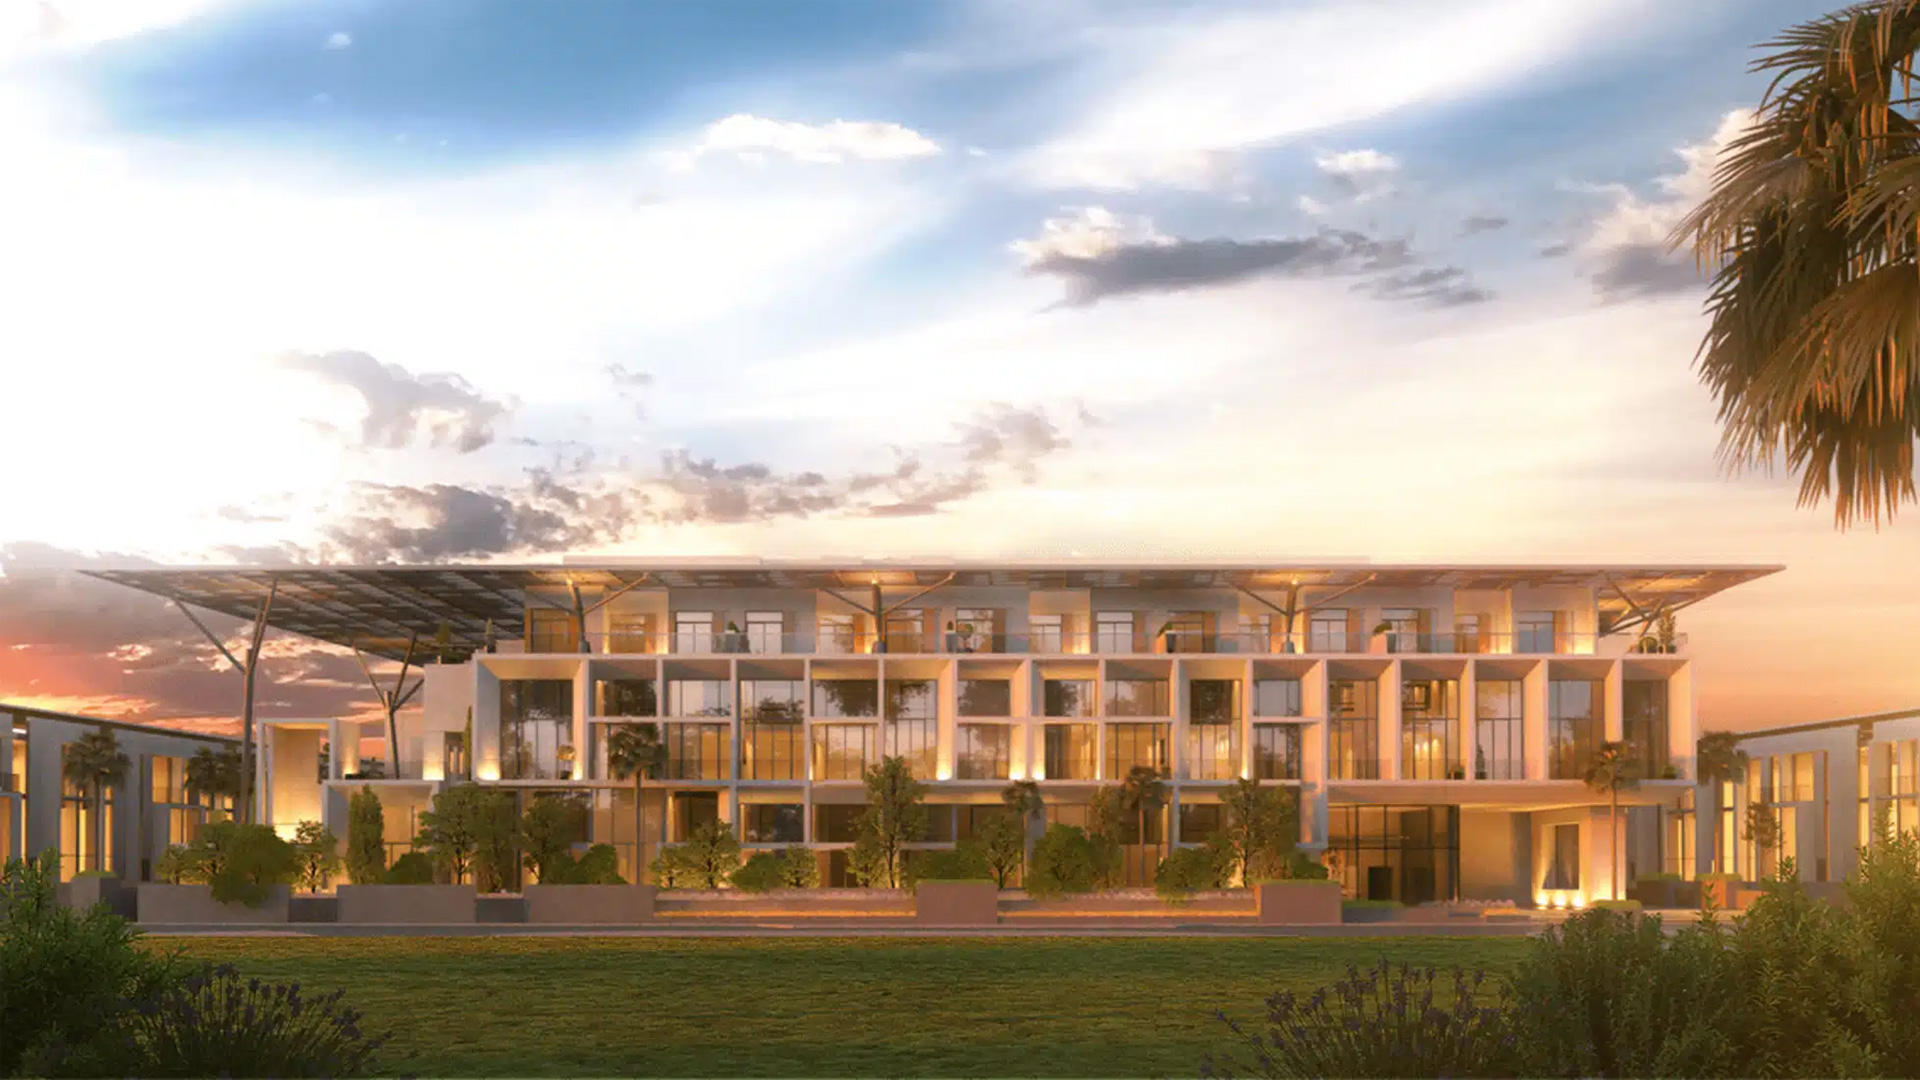 THE AUTOGRAPH RESIDENCES by Green Group in Jumeirah Village Circle, Dubai, UAE